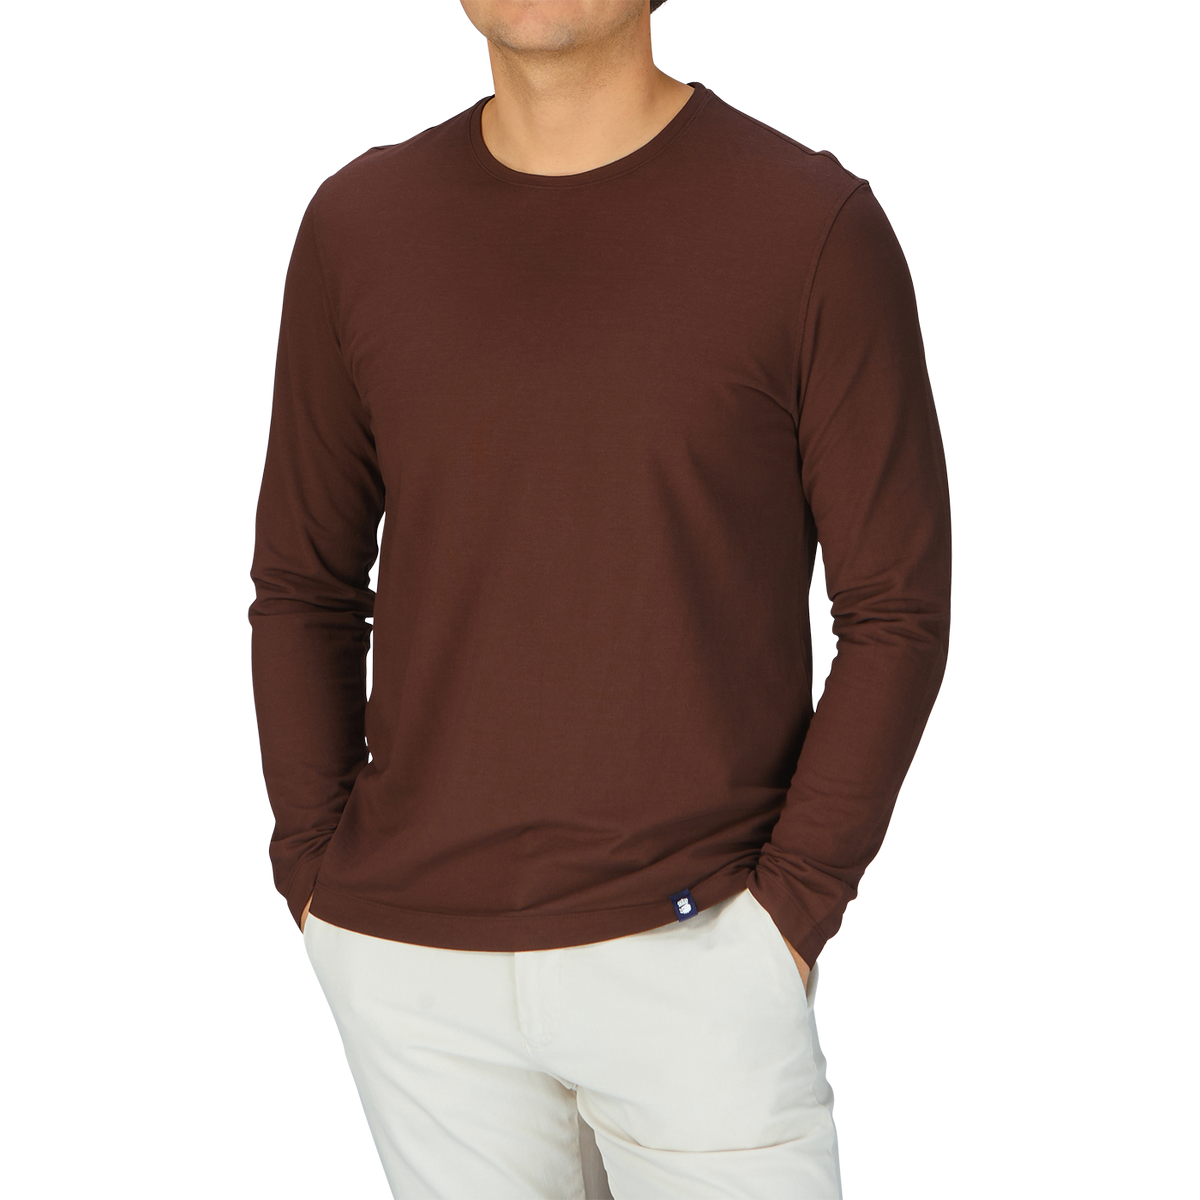 A man wearing a Drumohr Golden Brown Ice Cotton LS T-Shirt from Italy.